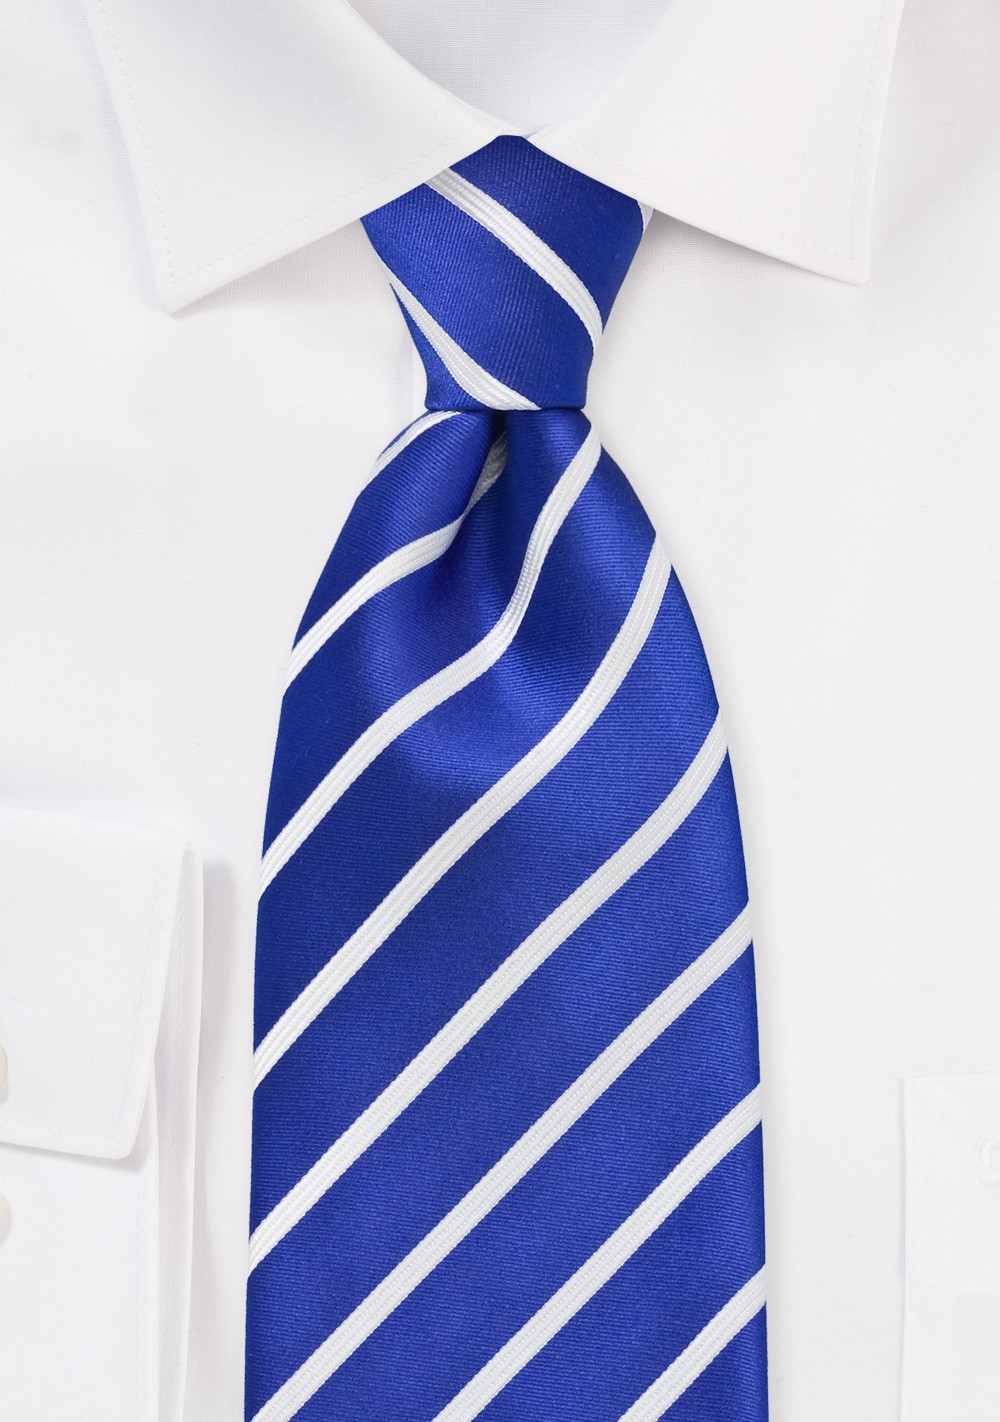 Marine Blue and White Tie for Kids